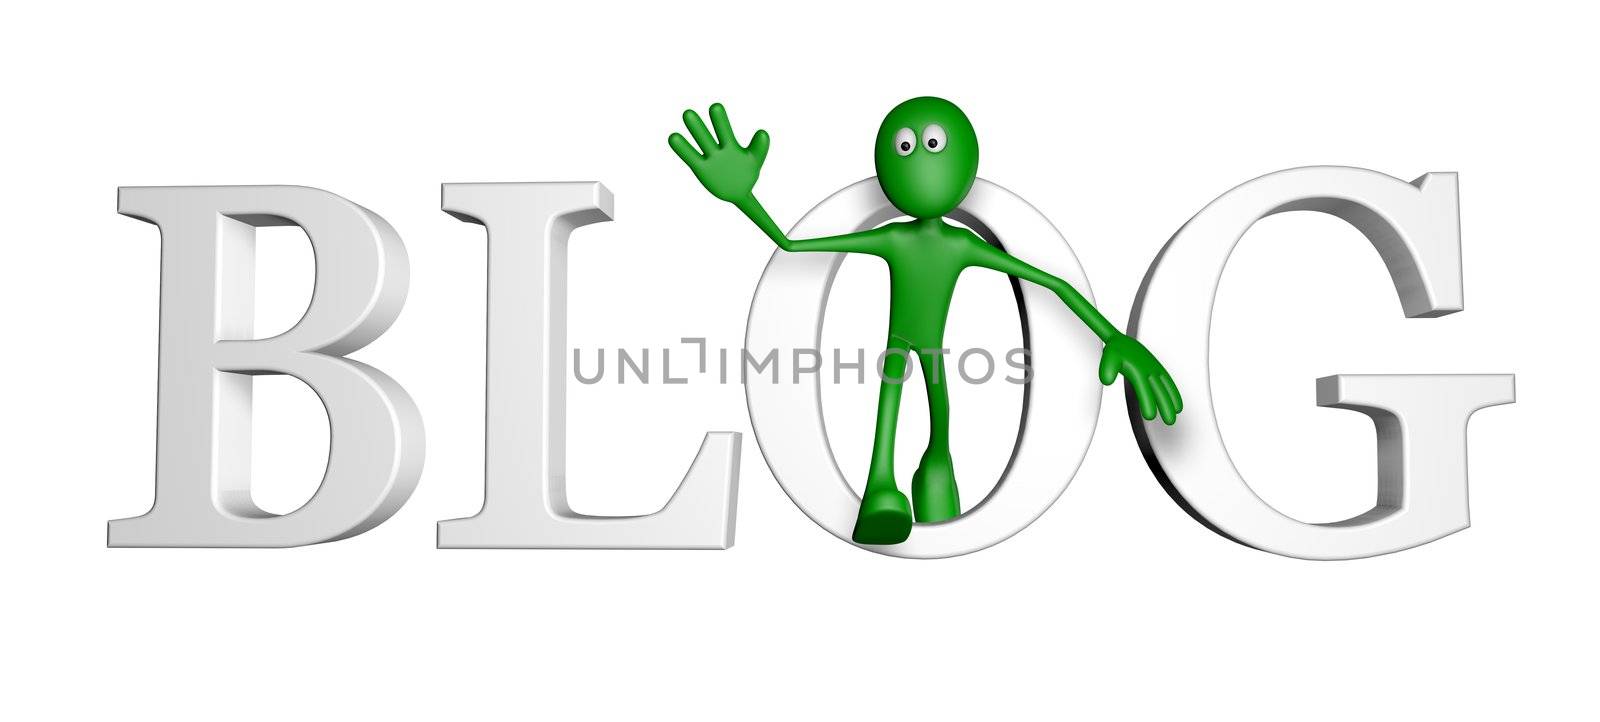 green guy and the word blog - 3d illustration